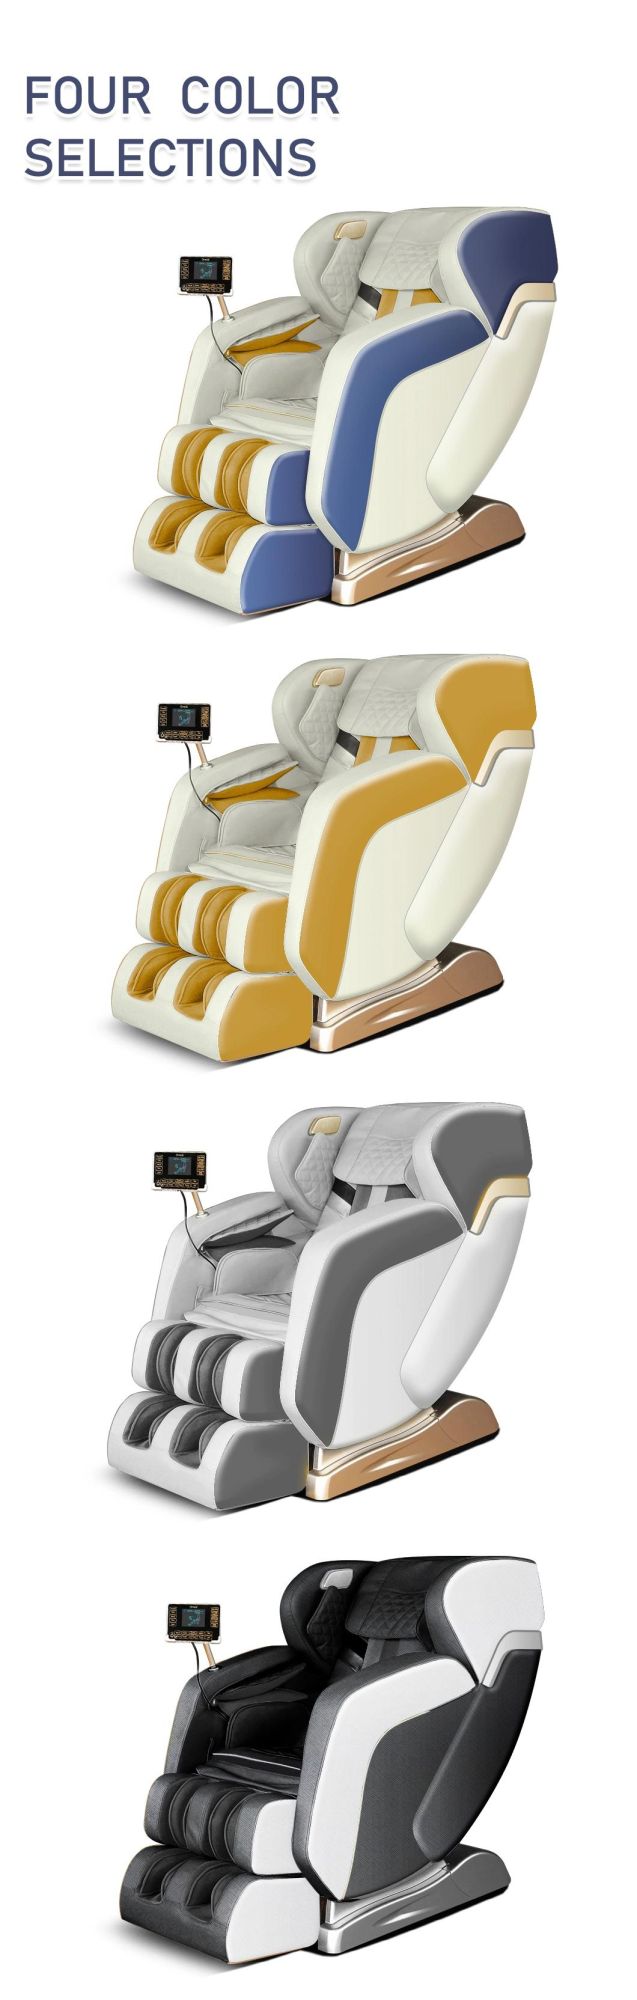 Electric Space Cabin Home Office Massage Chair Full Body Multi-Function Luxury Intelligent Automatic Sofa Chair